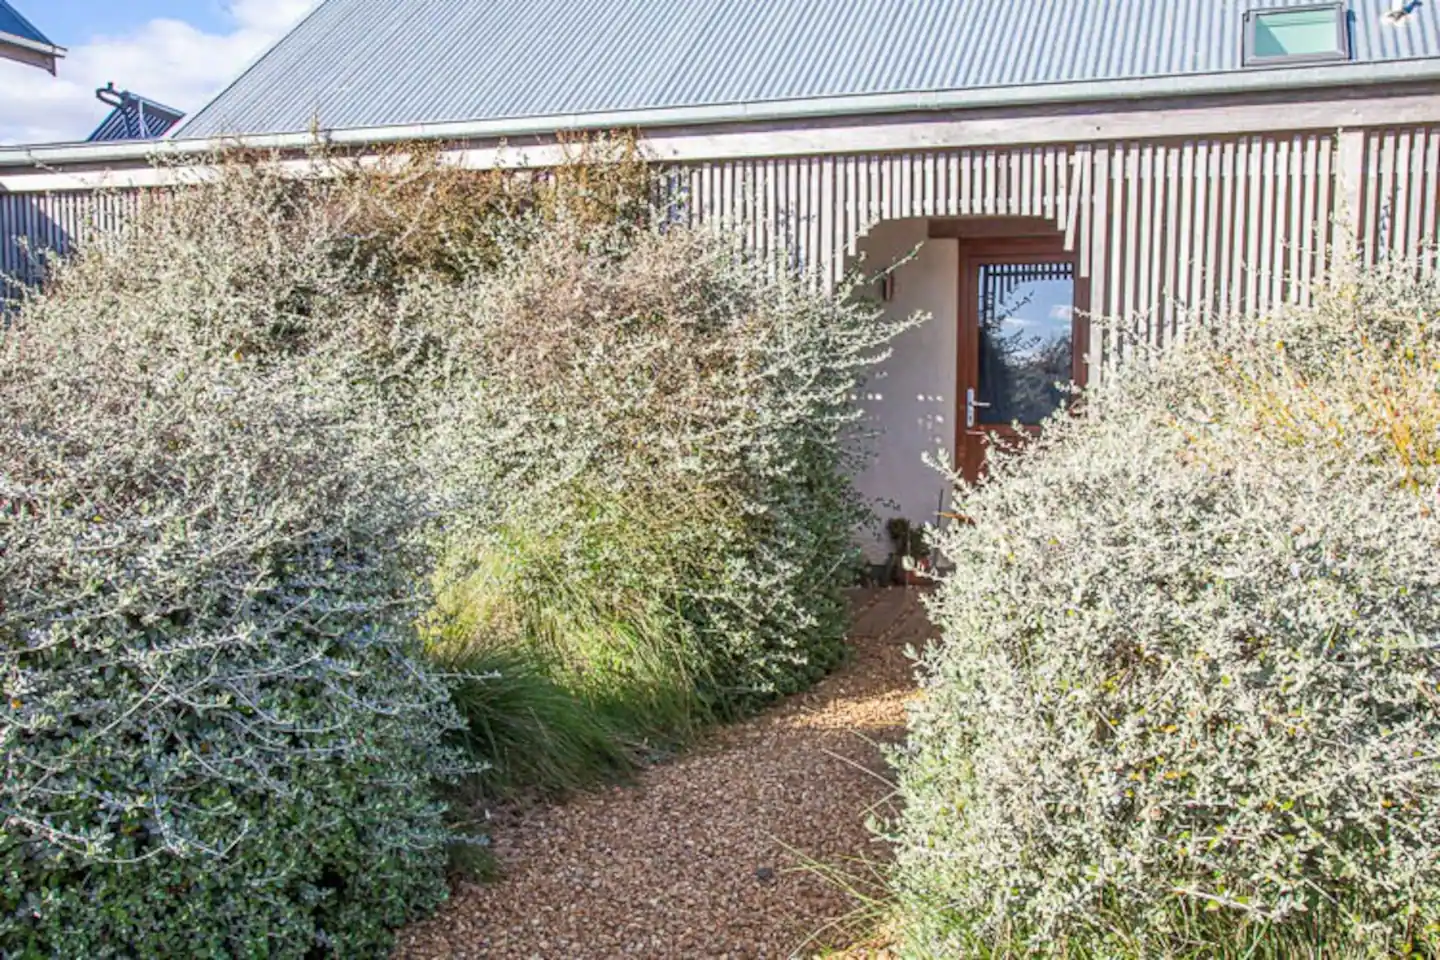 The straw cottage at Orto Farm Stay near Daylesford, Victoria